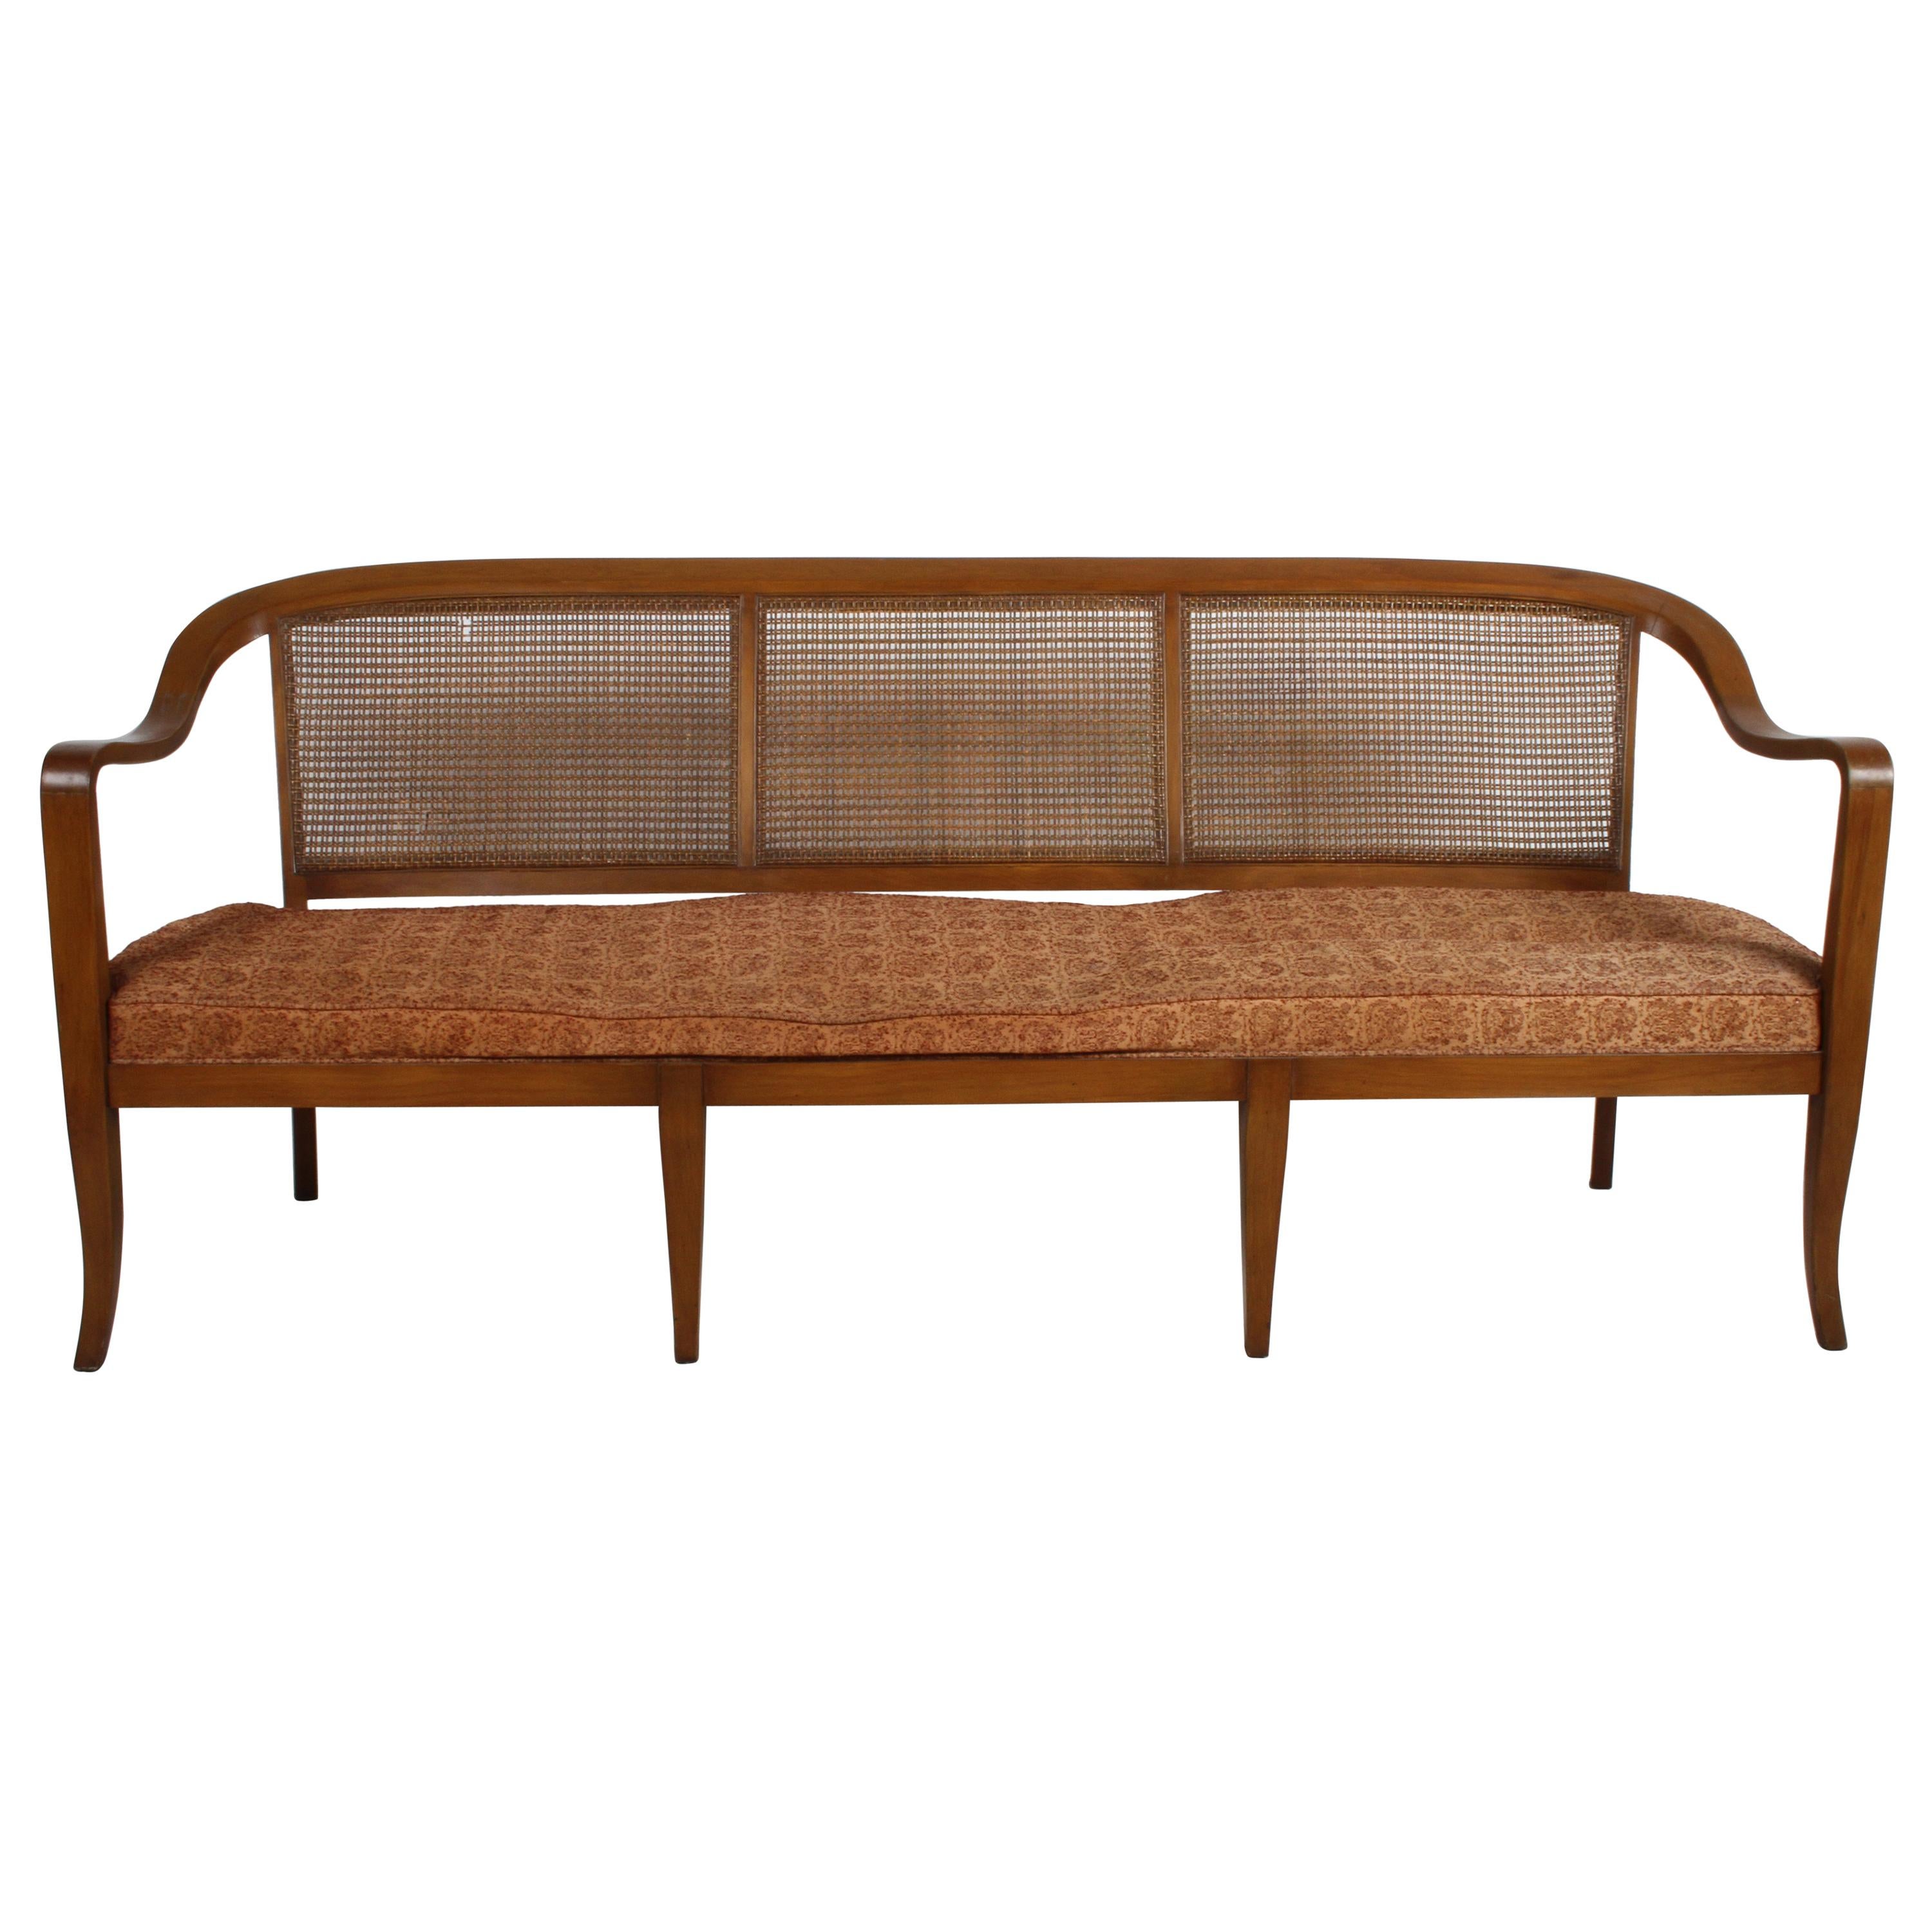 Edward Wormley for Dunbar Style Cane Bentwood Bench or Sofa